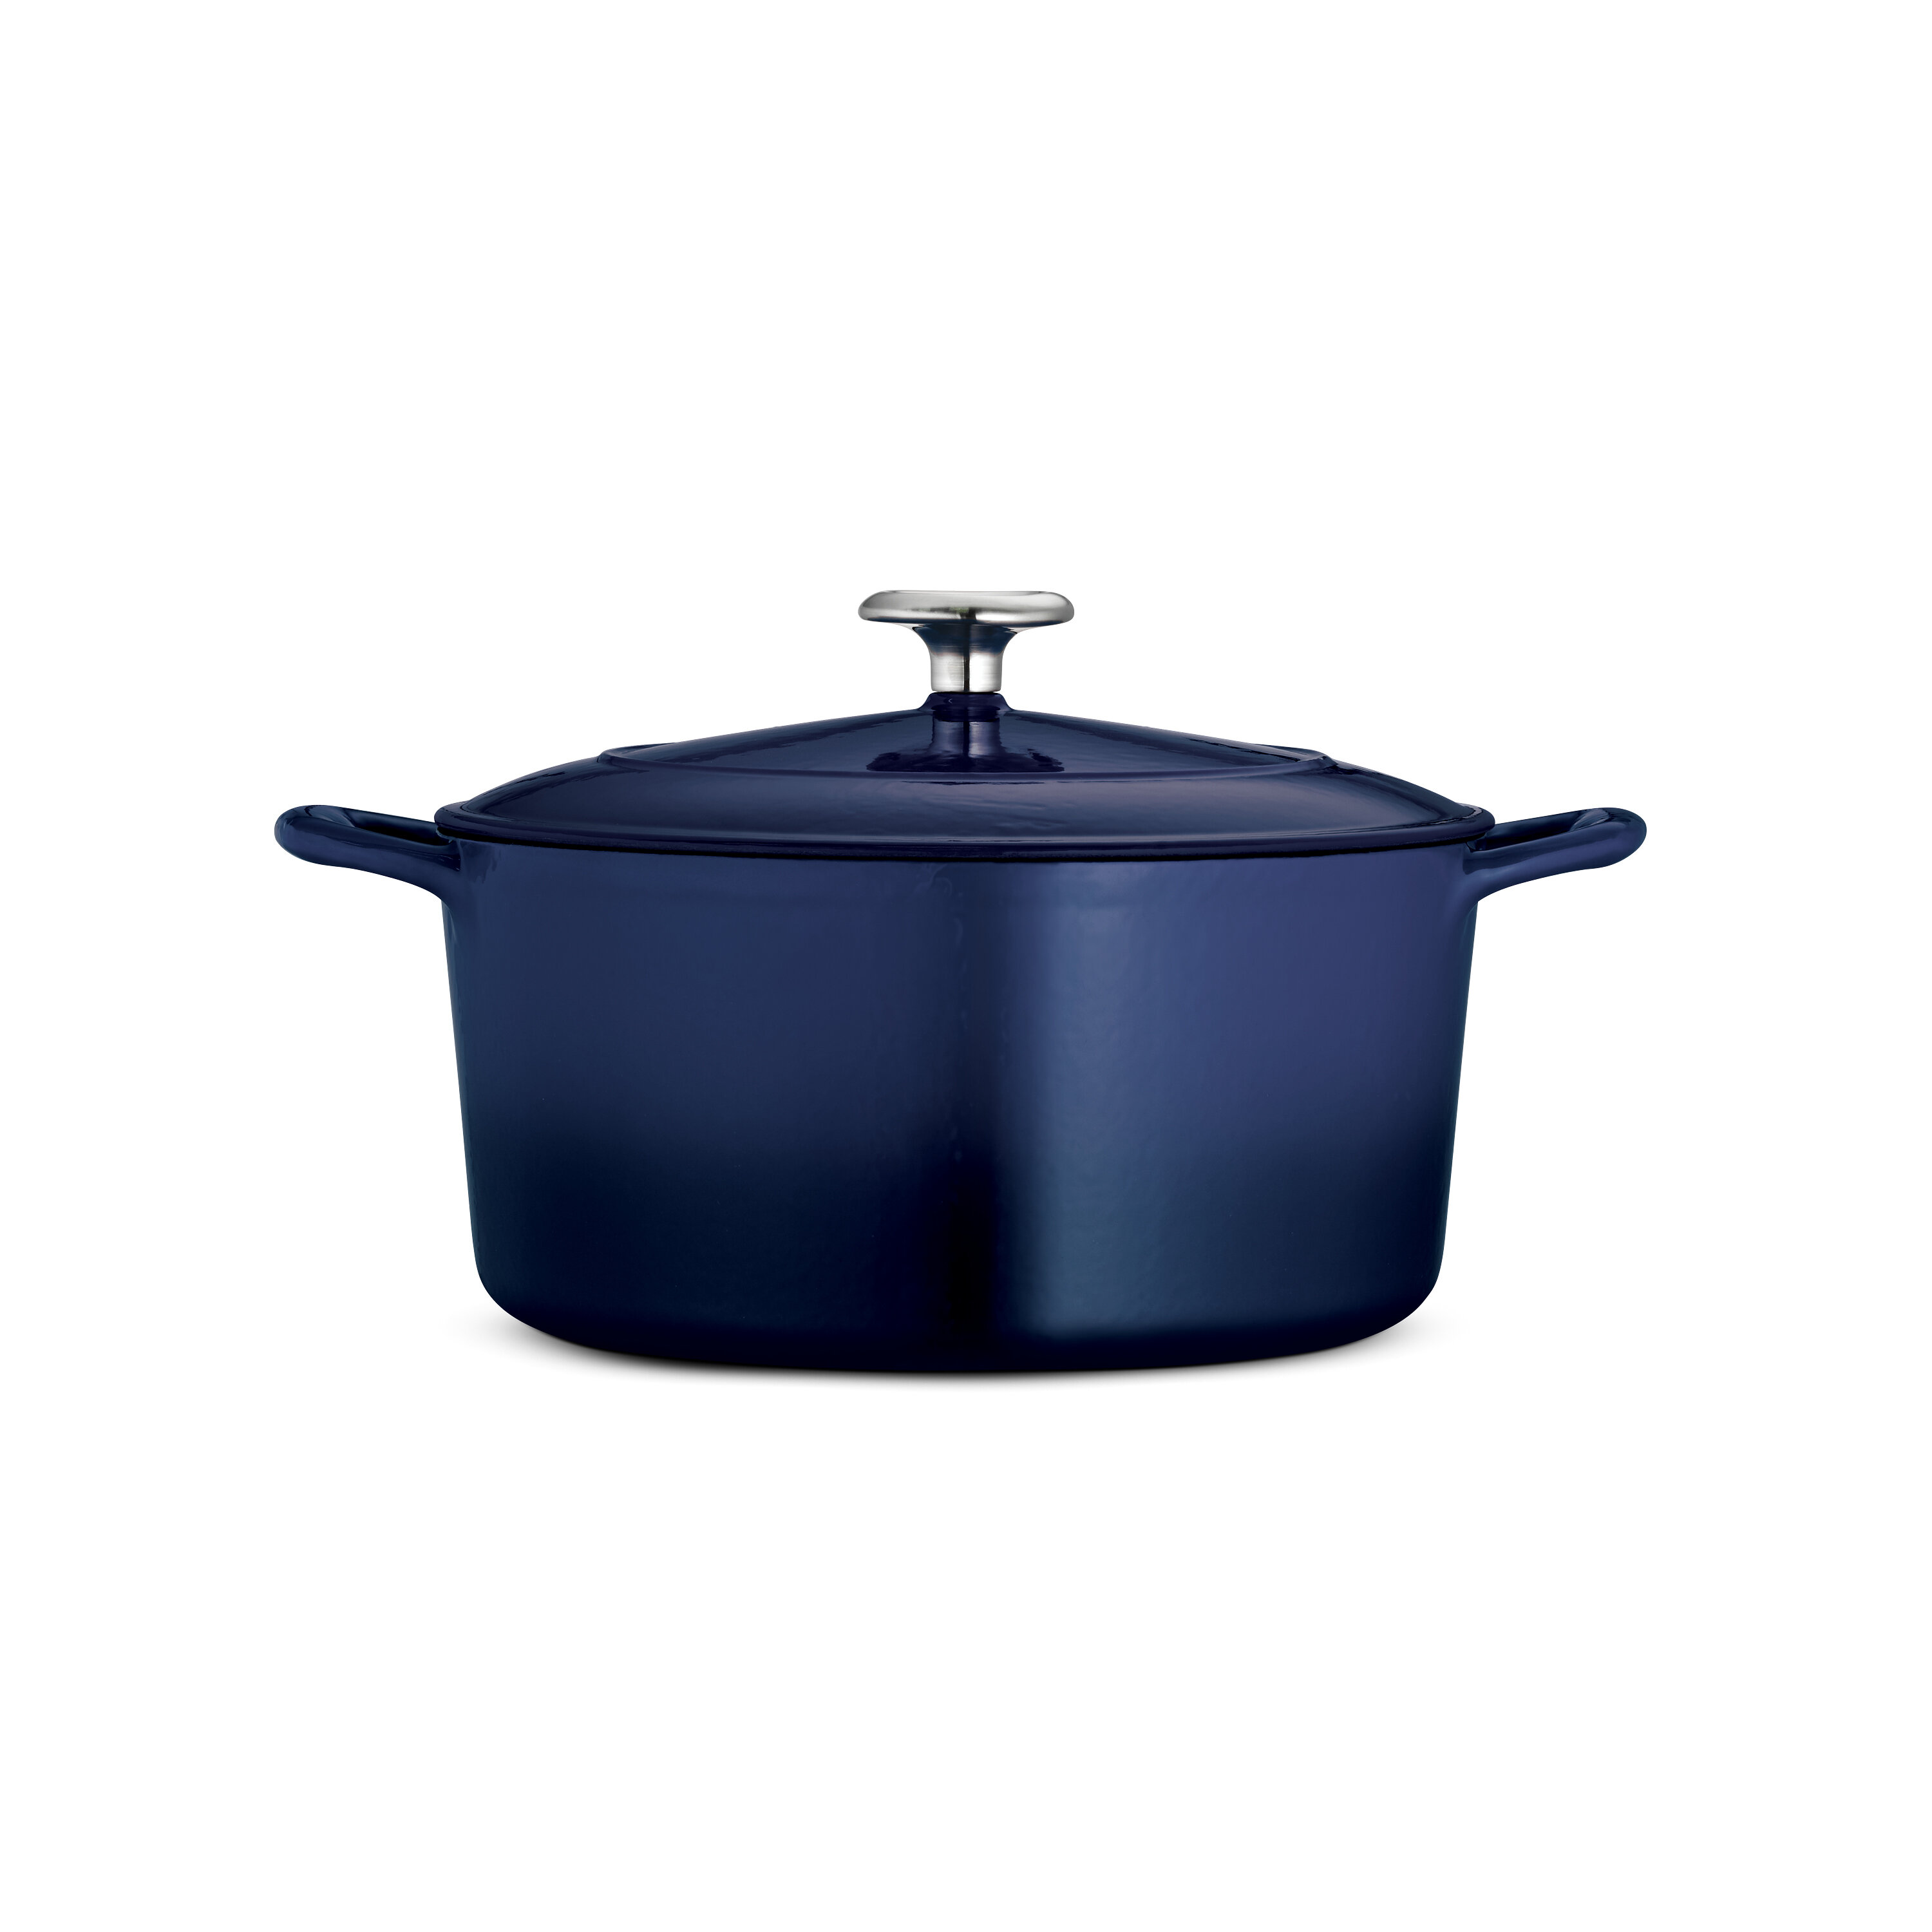 7 qt Enameled Cast Iron Covered Tall Round Dutch Oven - Sunrise